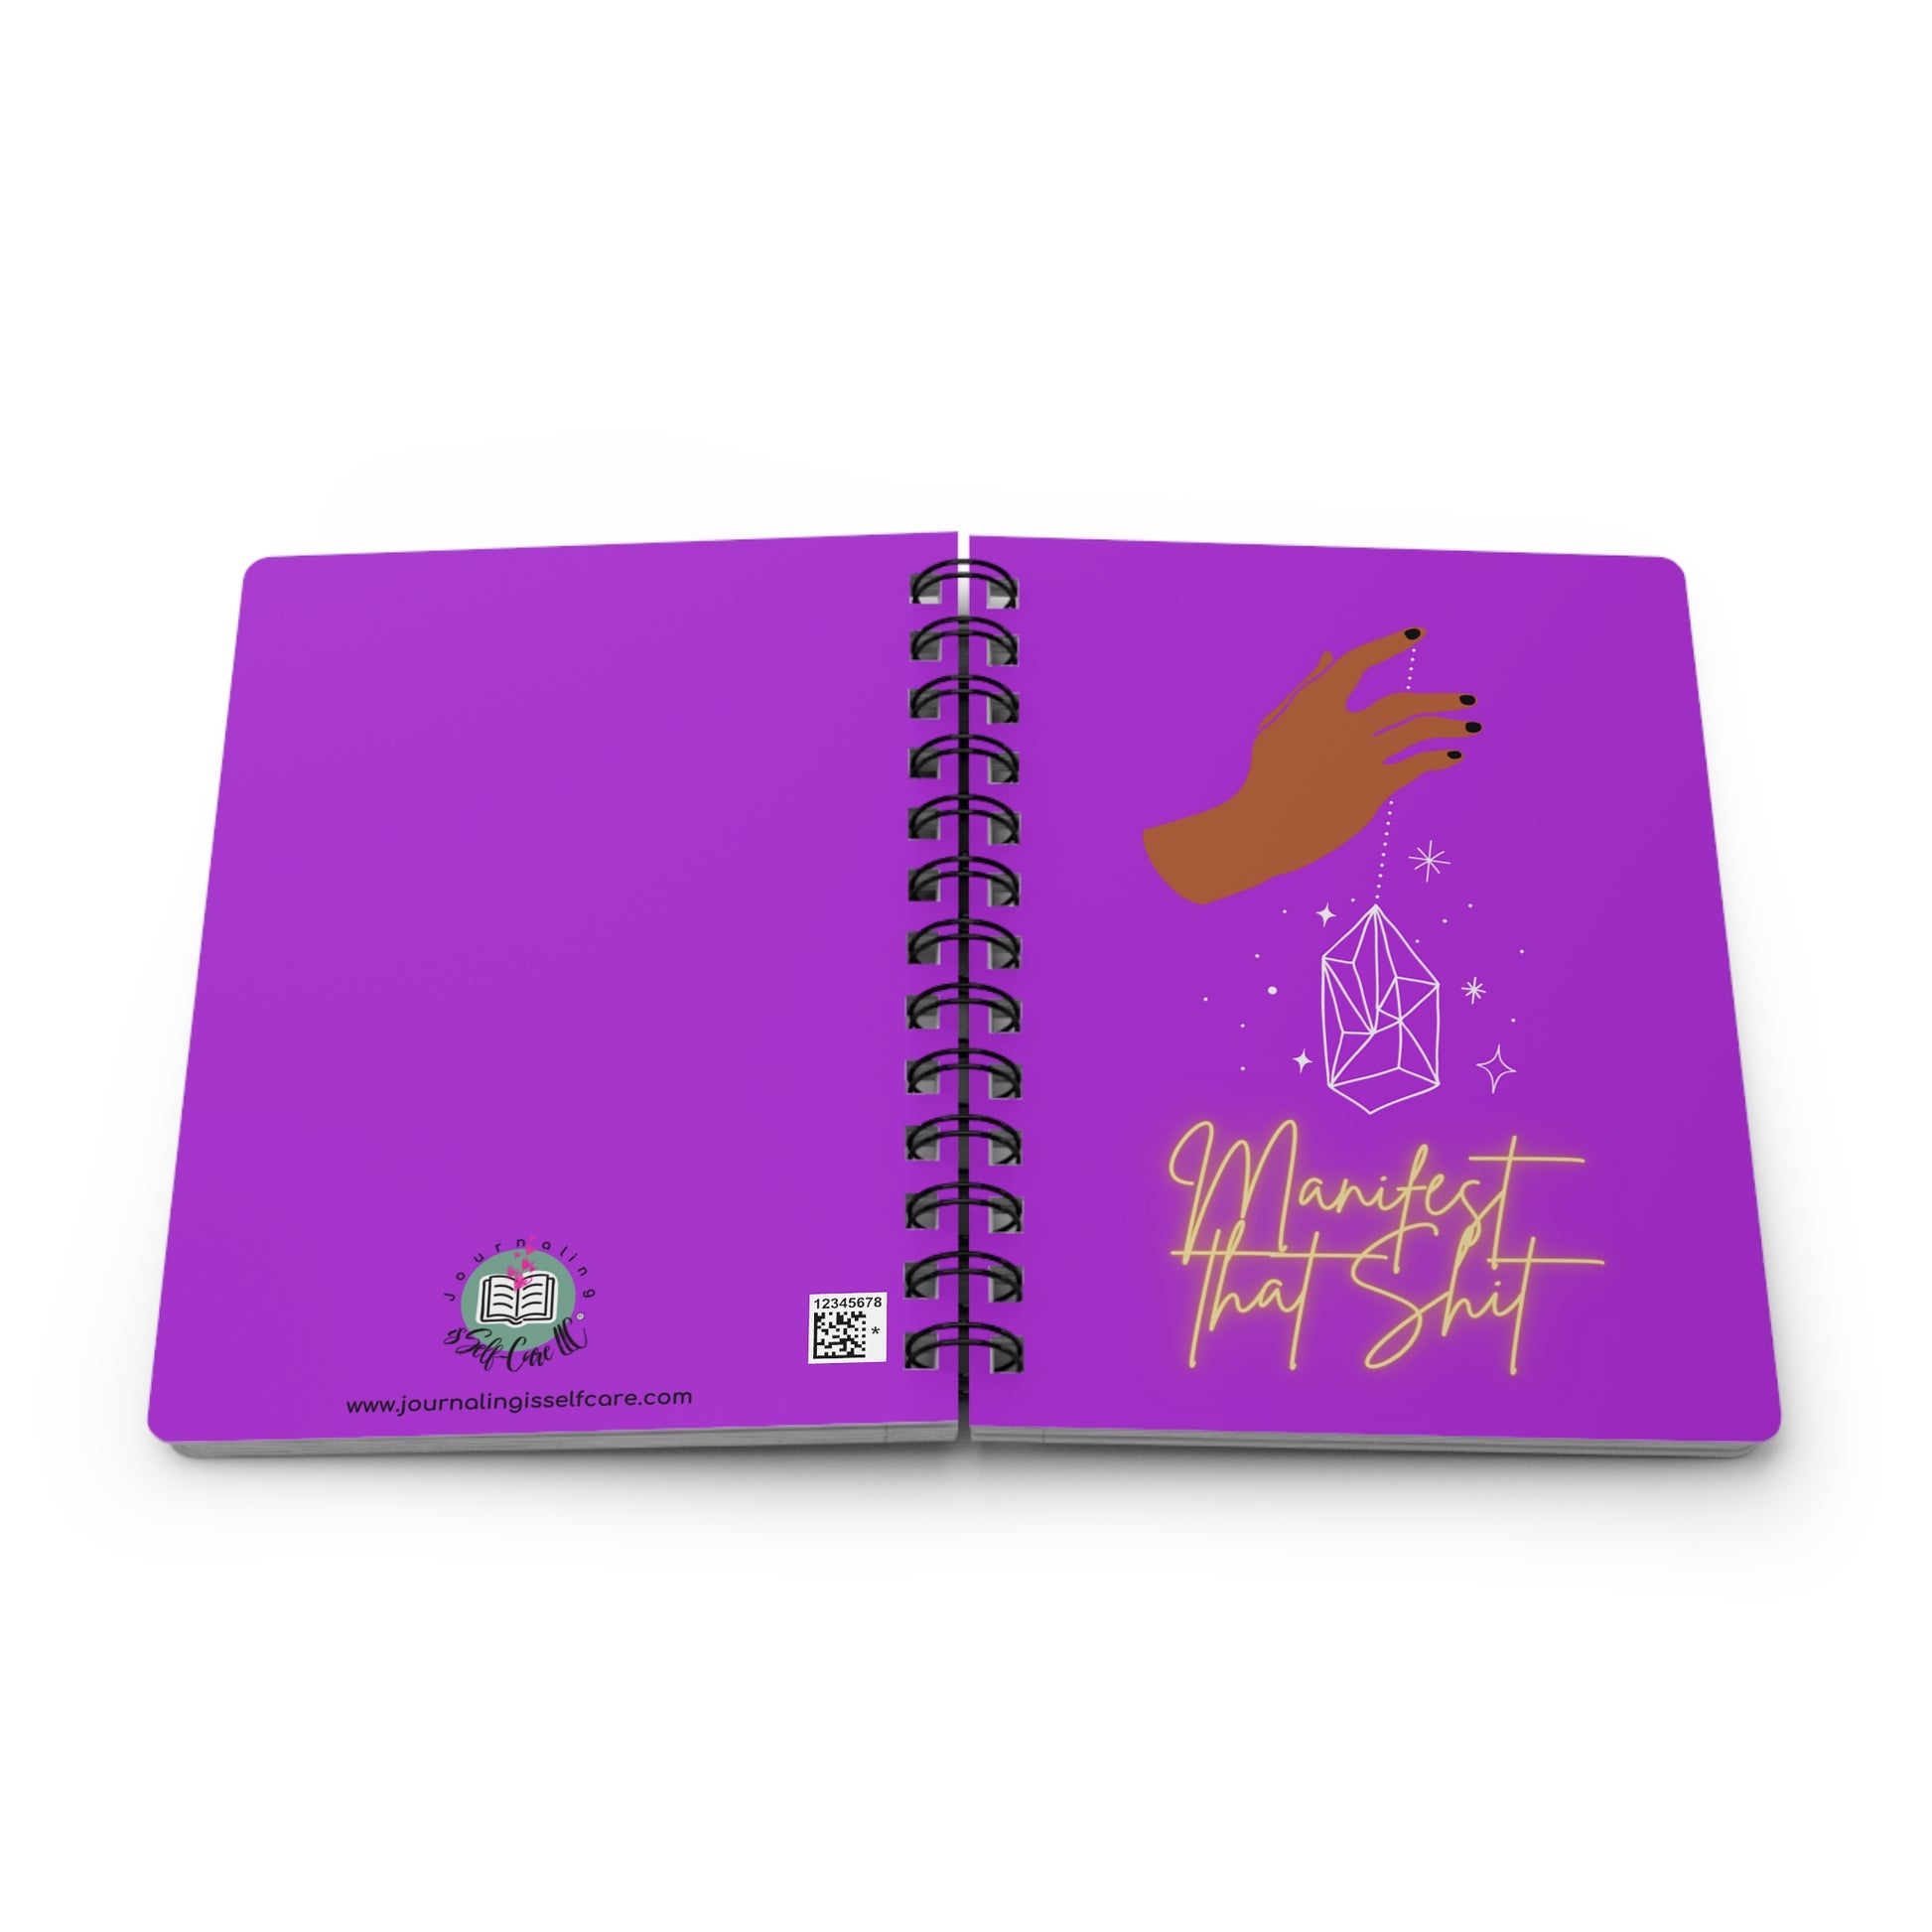 A purple spiral notebook decorated with an image of a hand, perfect for your "Manifest That Shit" Manifesting Journal for Scripting's mindset and law of attraction practices.